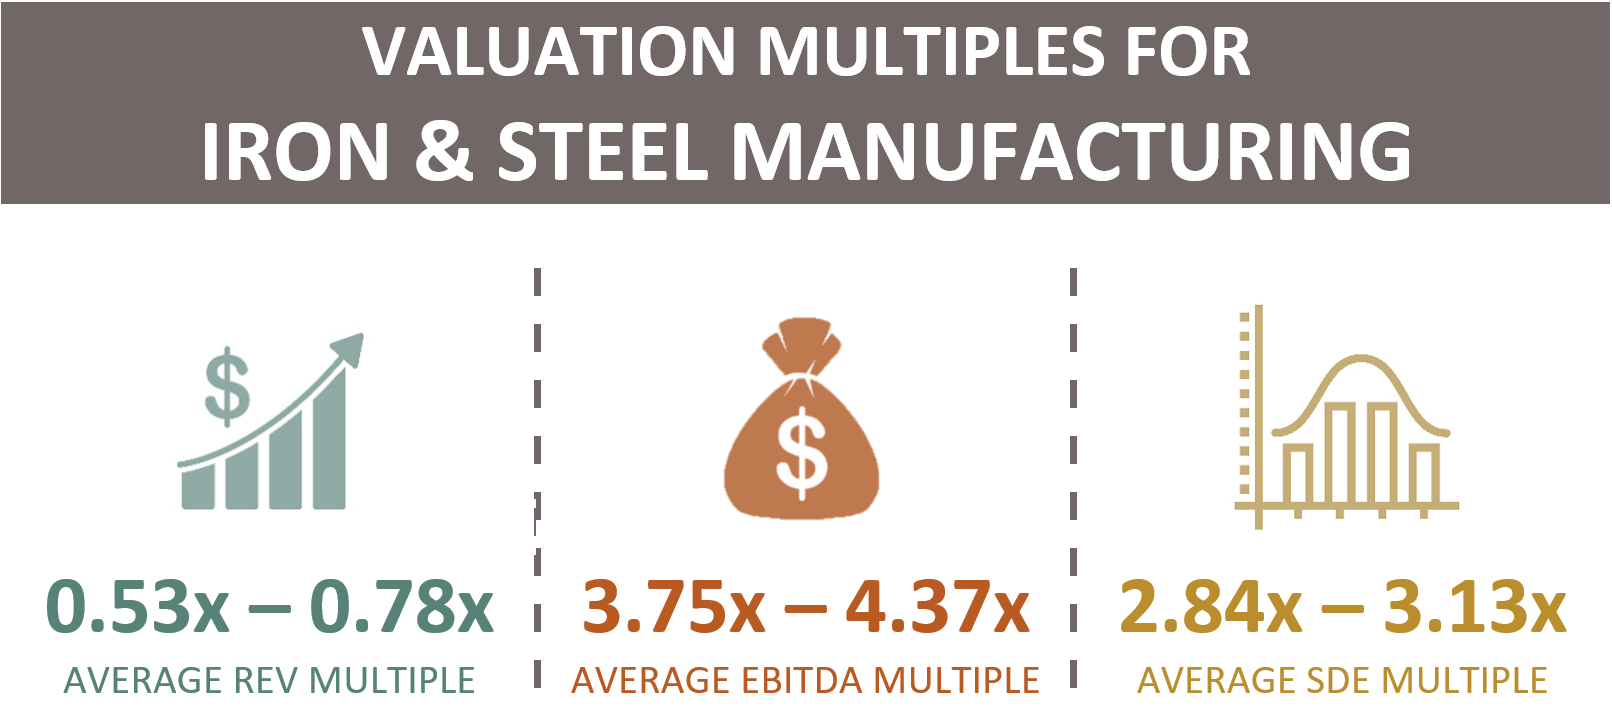 Valuation Multiples For Iron And Steel Manufacturing